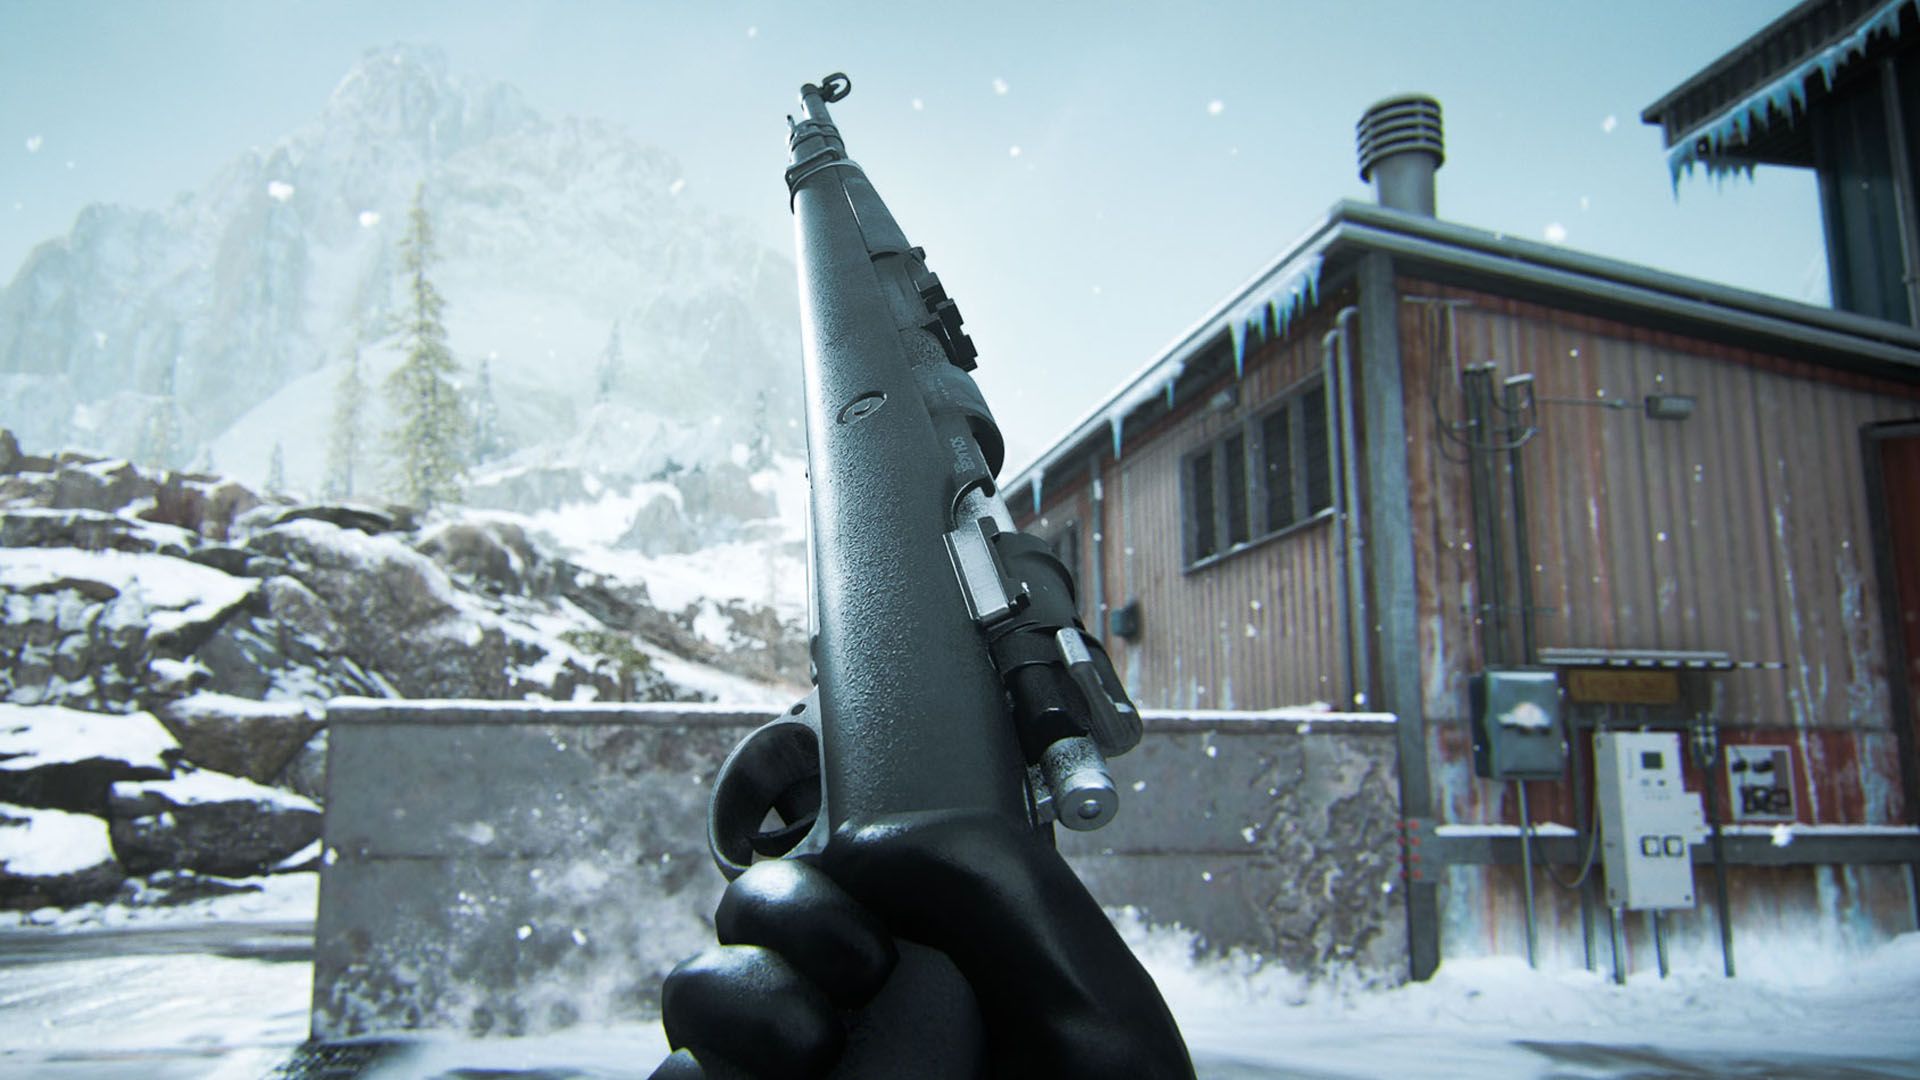 Warzone player holding Kar98k marksman rifle with snow-covered building and rocks in background